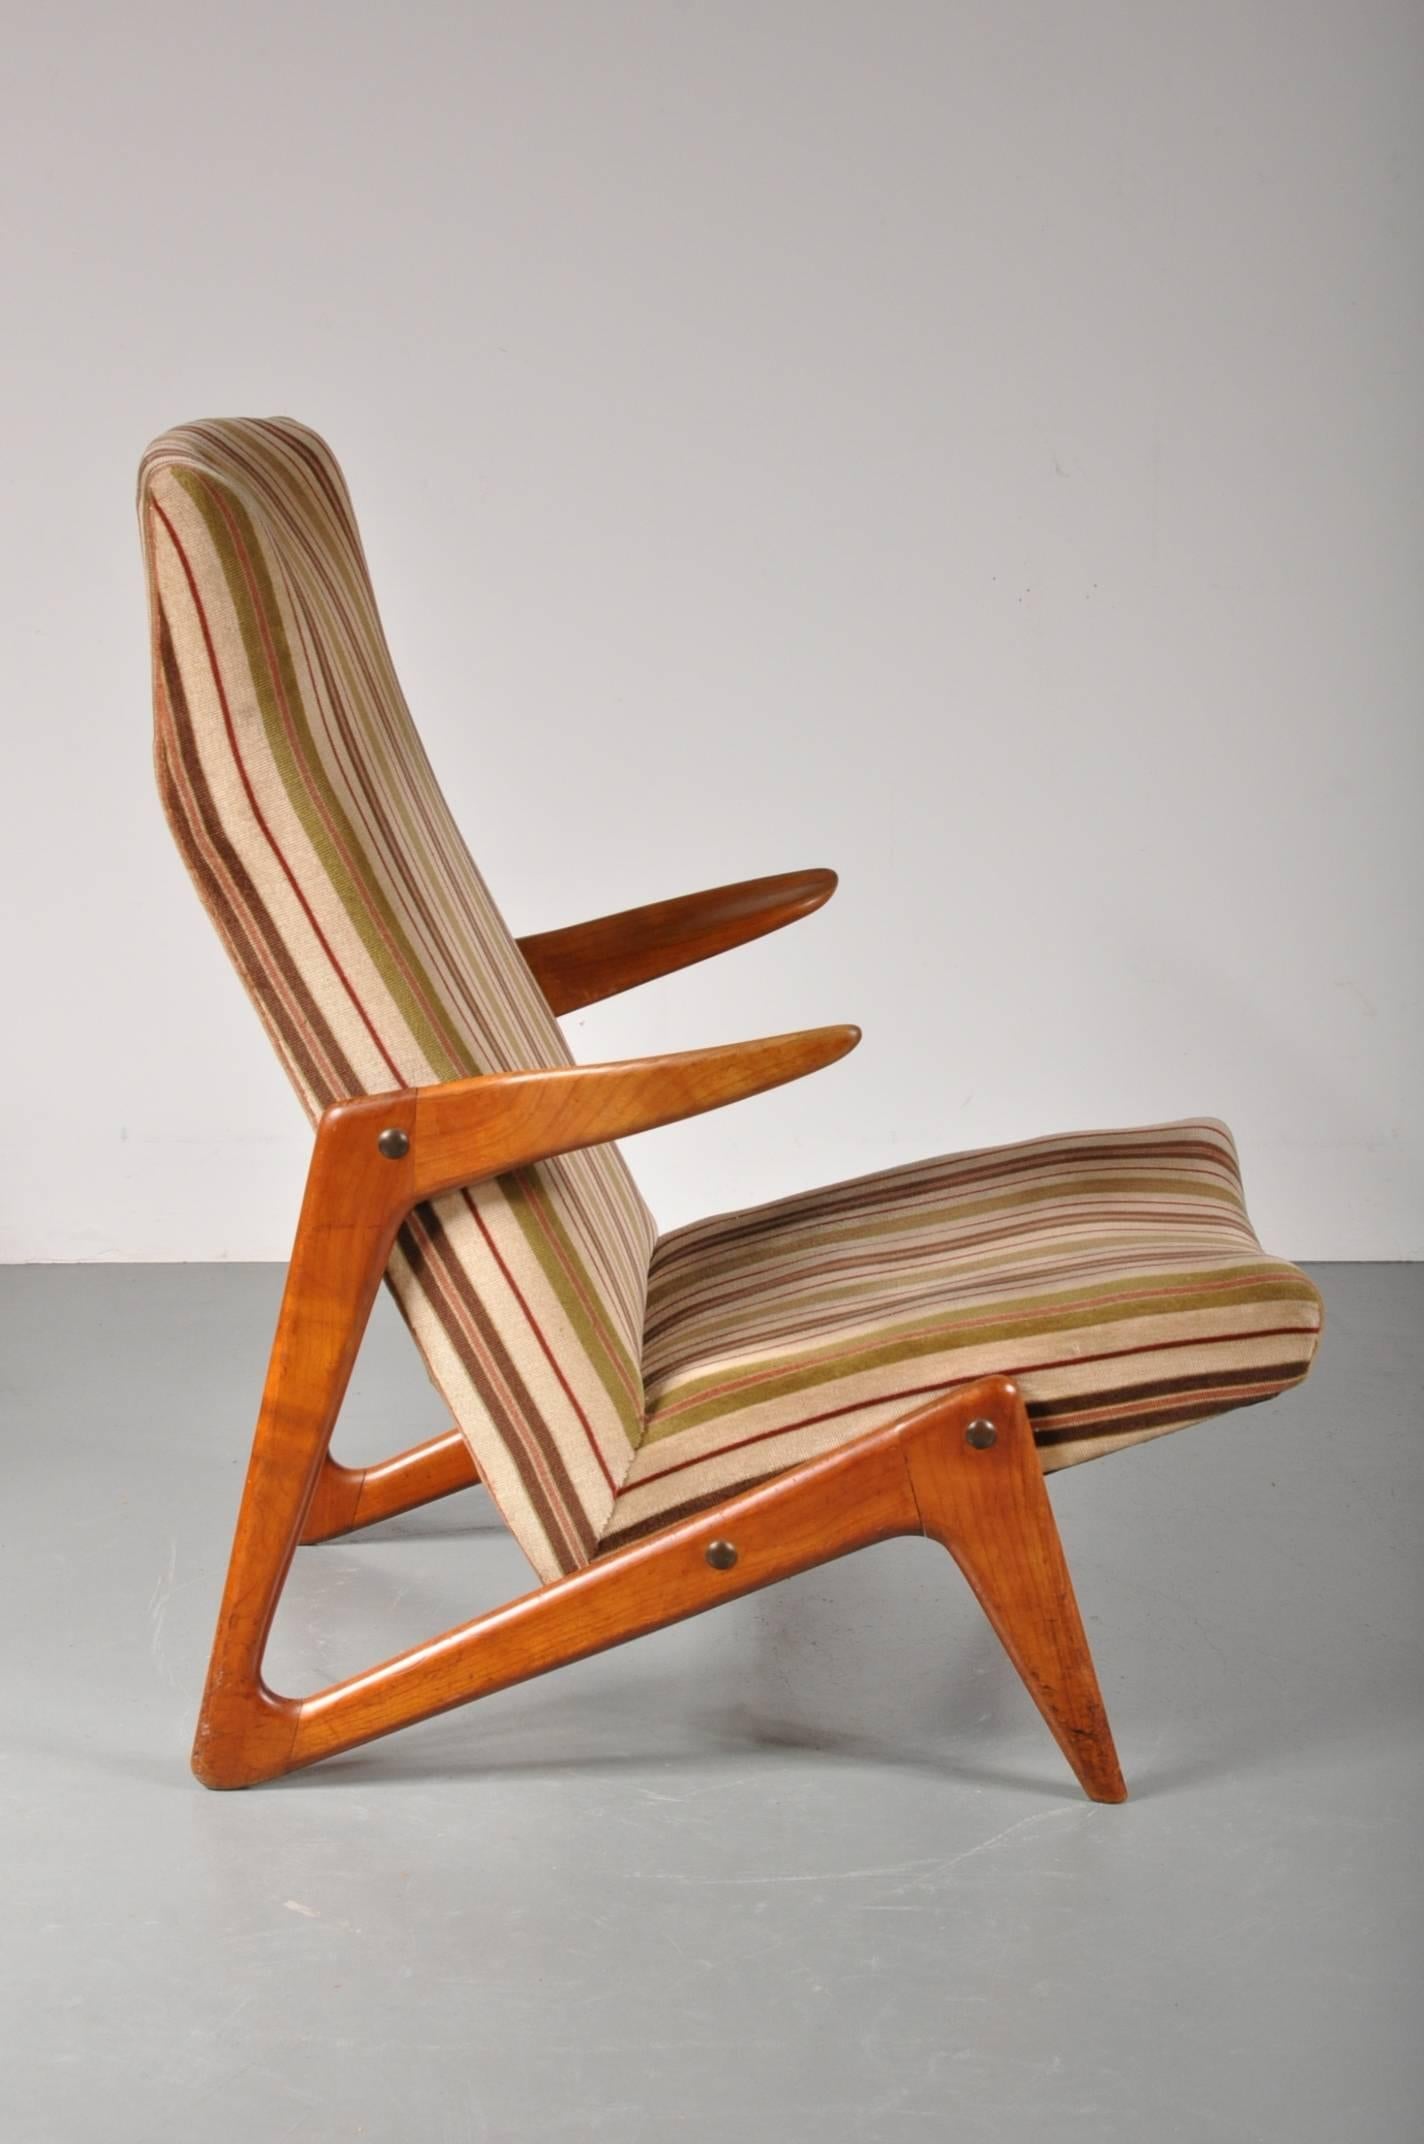 Eye-catching lounge chair, attributed to Alfred Hendrickx for Belform in Belgium, 1950s.

The chair has a very nicely designed walnut wooden base, creating a unique appearance from every angle. The comfortable seat is upholstered in the original